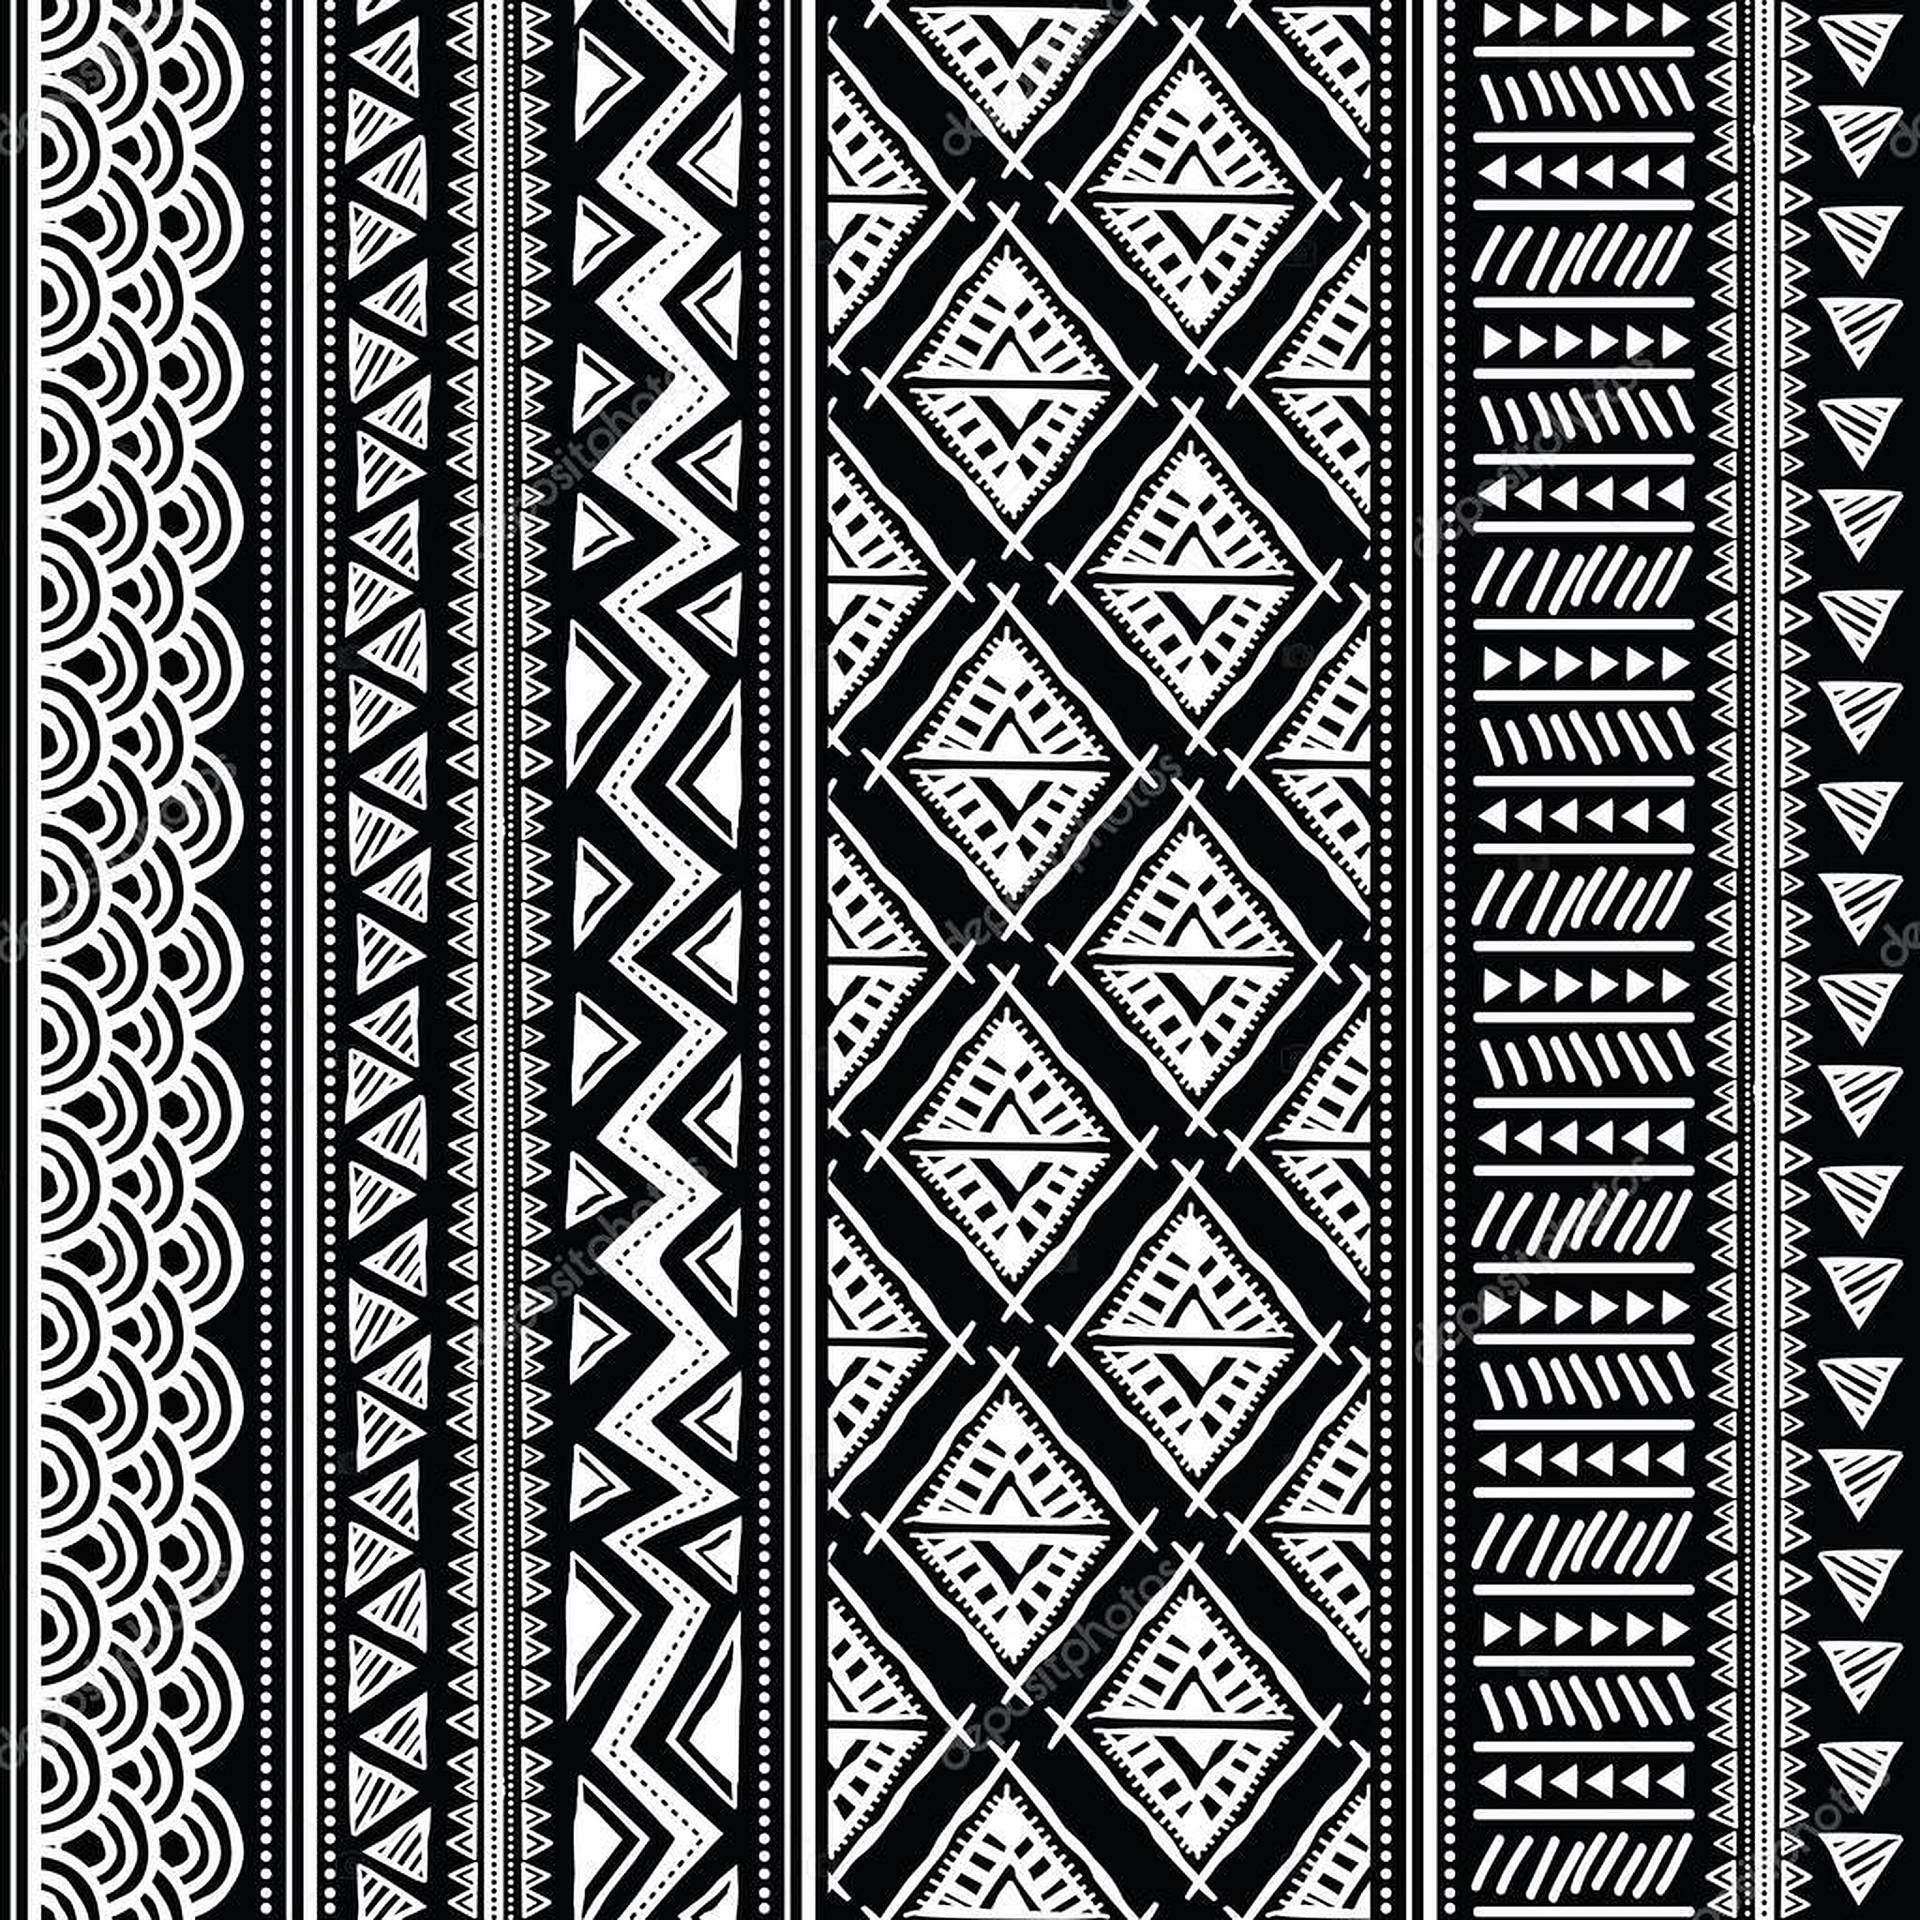 Abstract Tribal Patterns Wallpaper